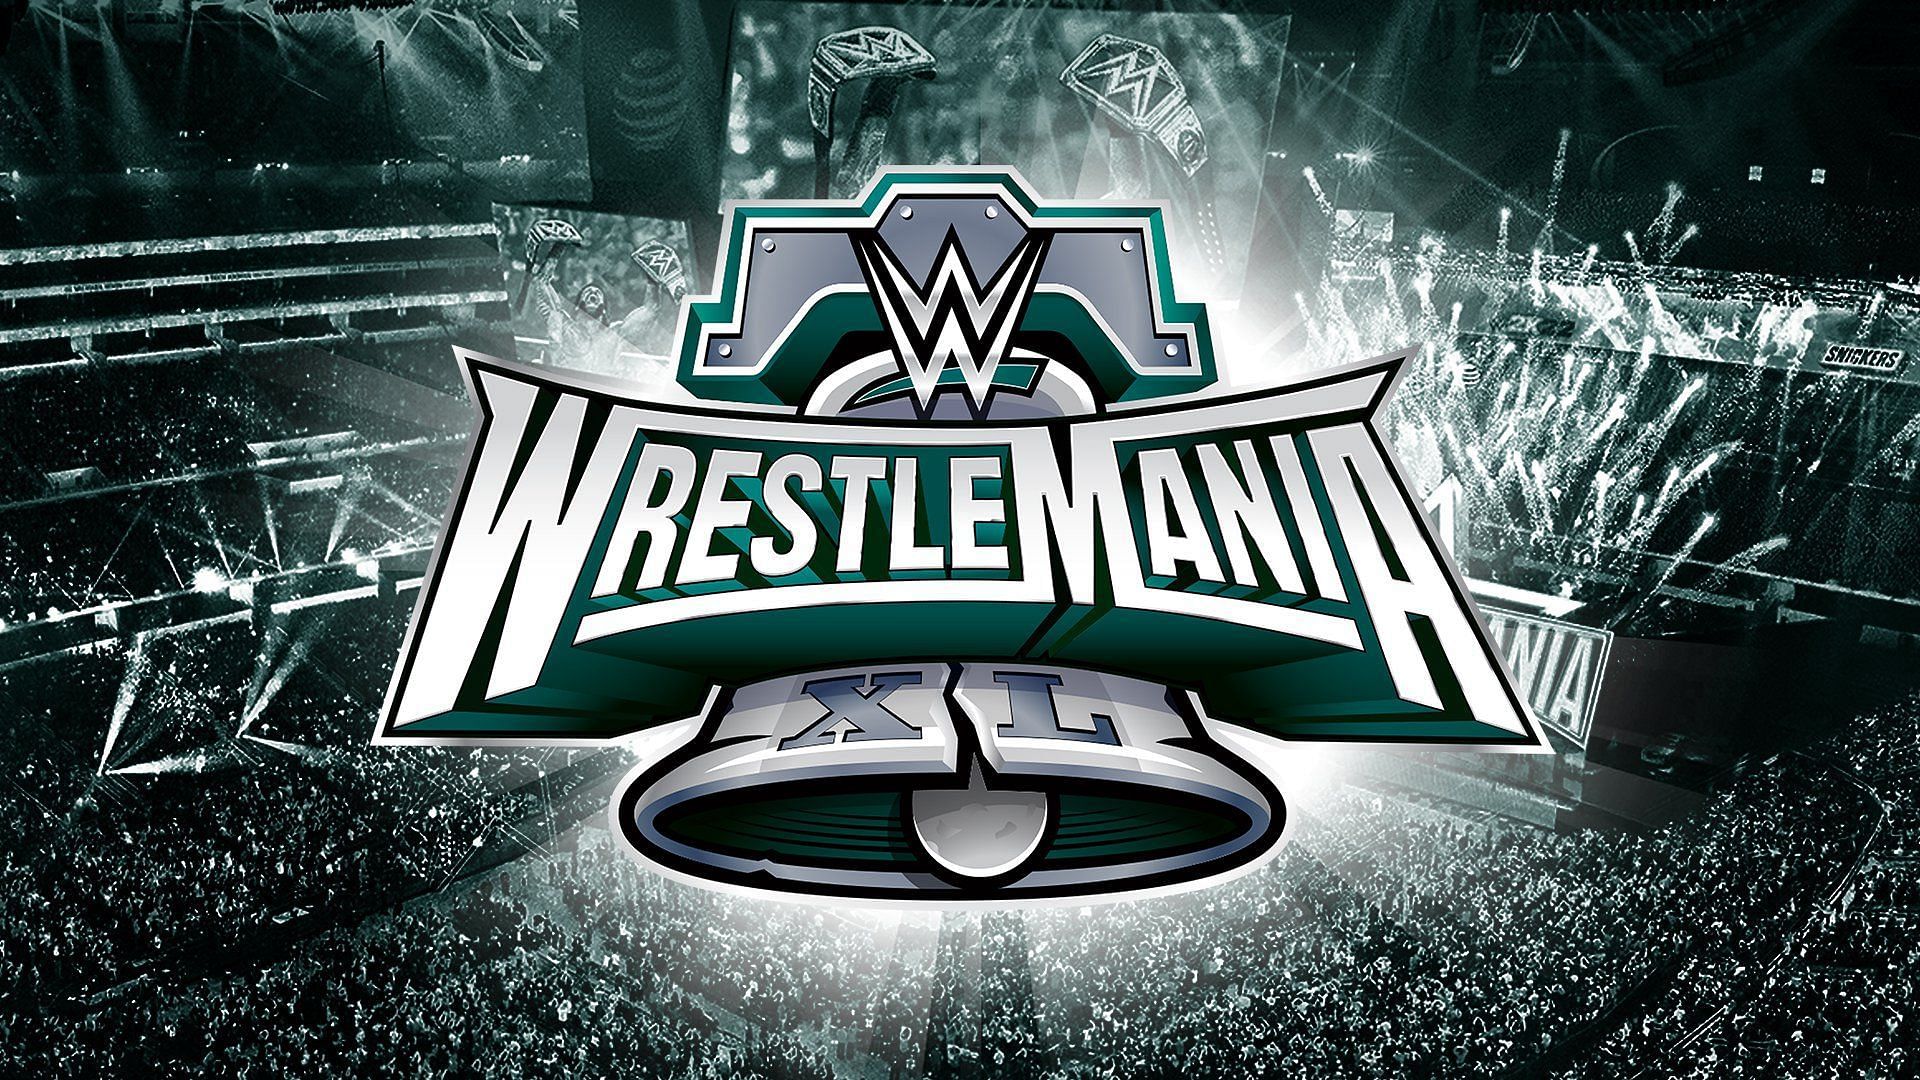 The official logo for WWE WrestleMania XL